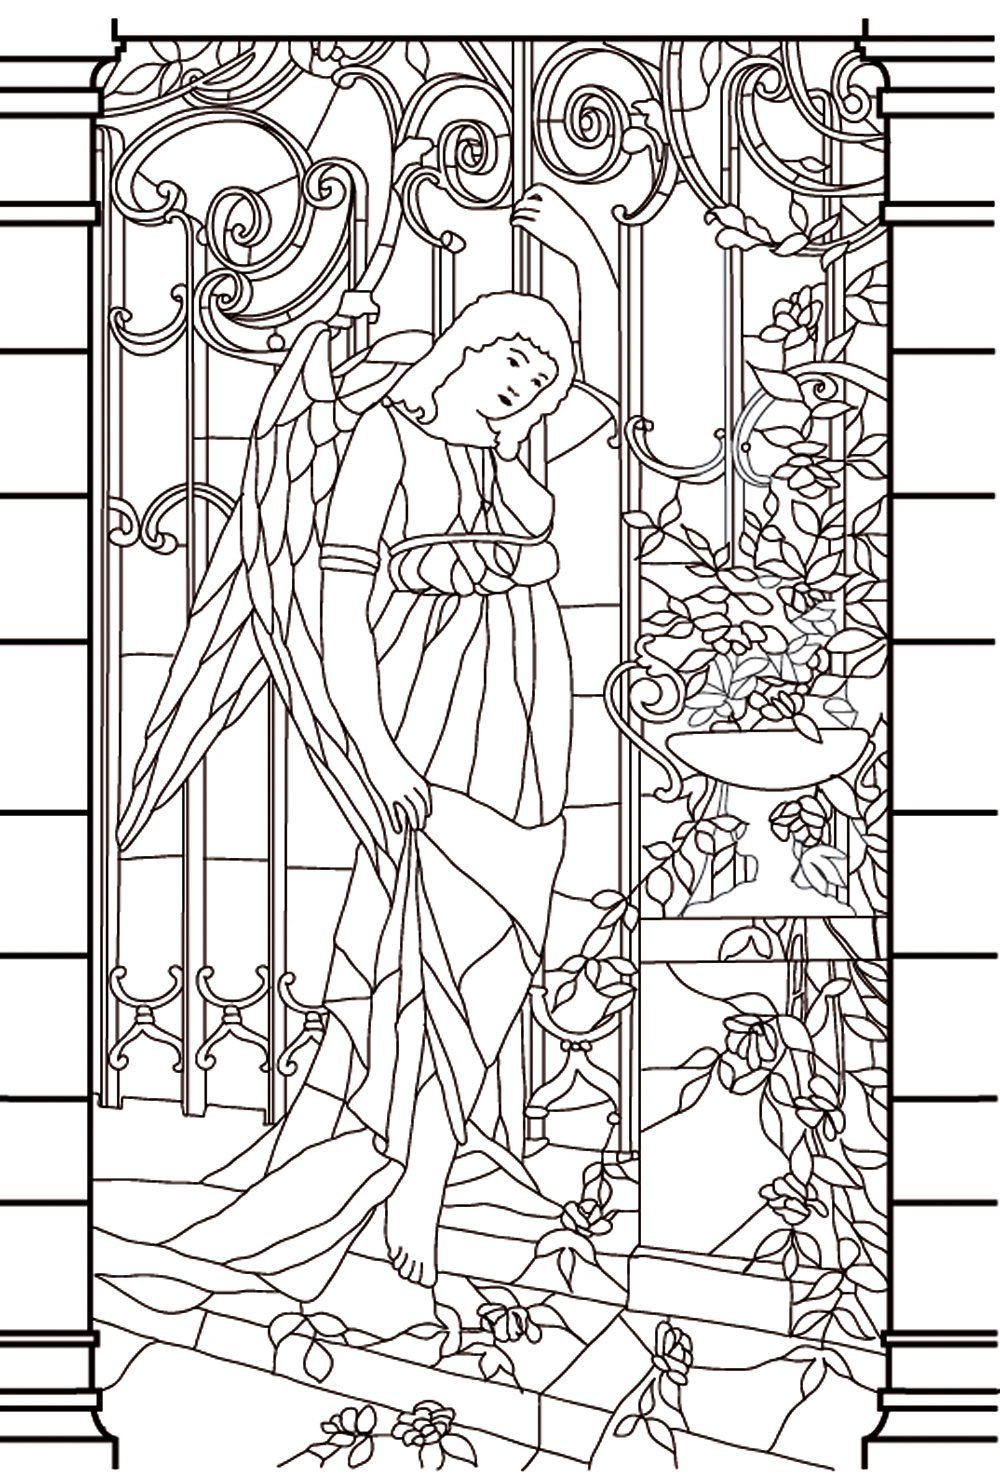 coloring age vitrail stained glass moyen adults goddess du middle vitraux window adult printable drawing melancholy aspect para dibujos colorear